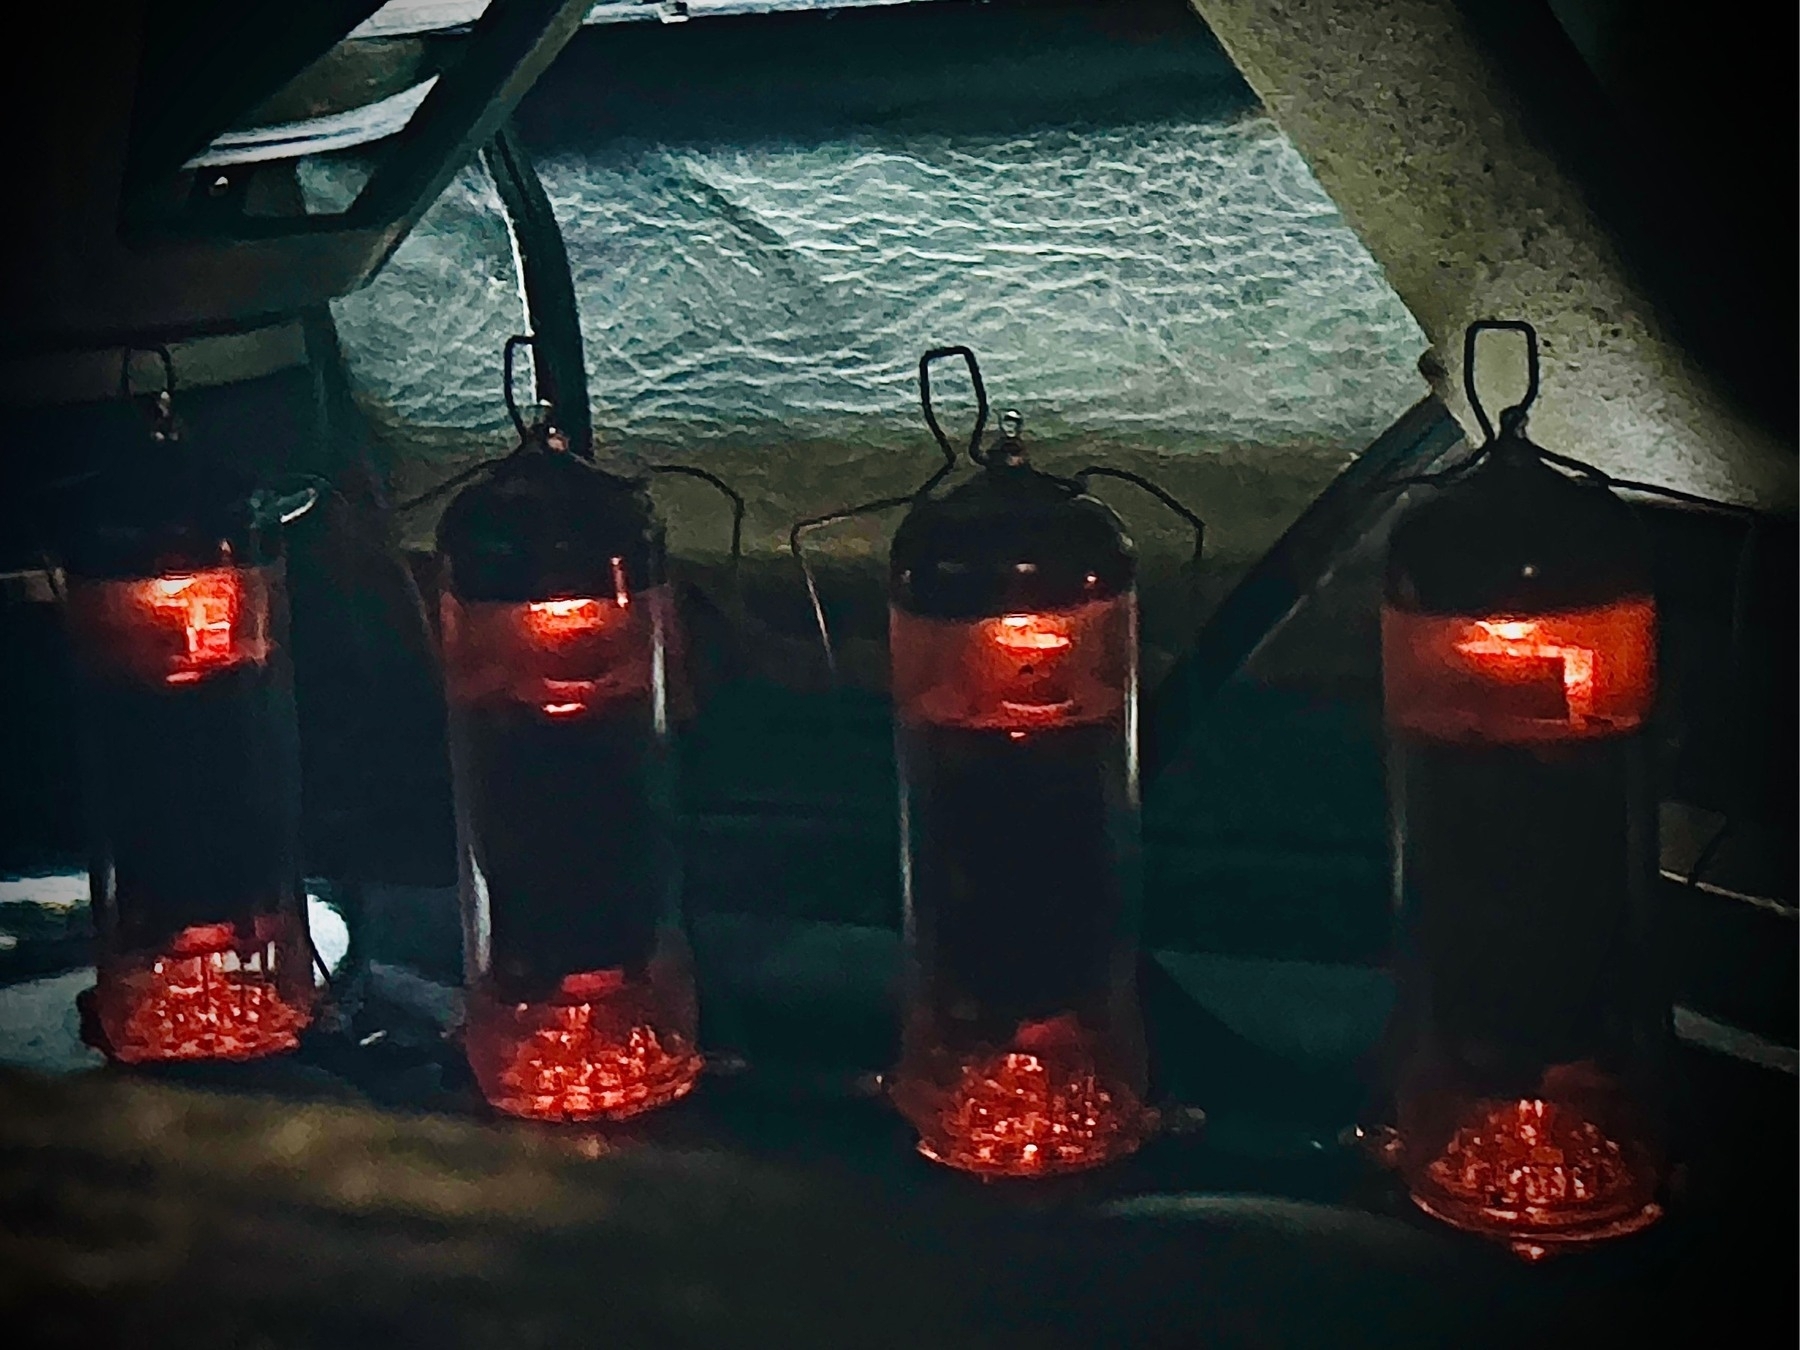 Looking down through the vent opening on the top of a tube amplifier, four vacuum tubes glow red hot.